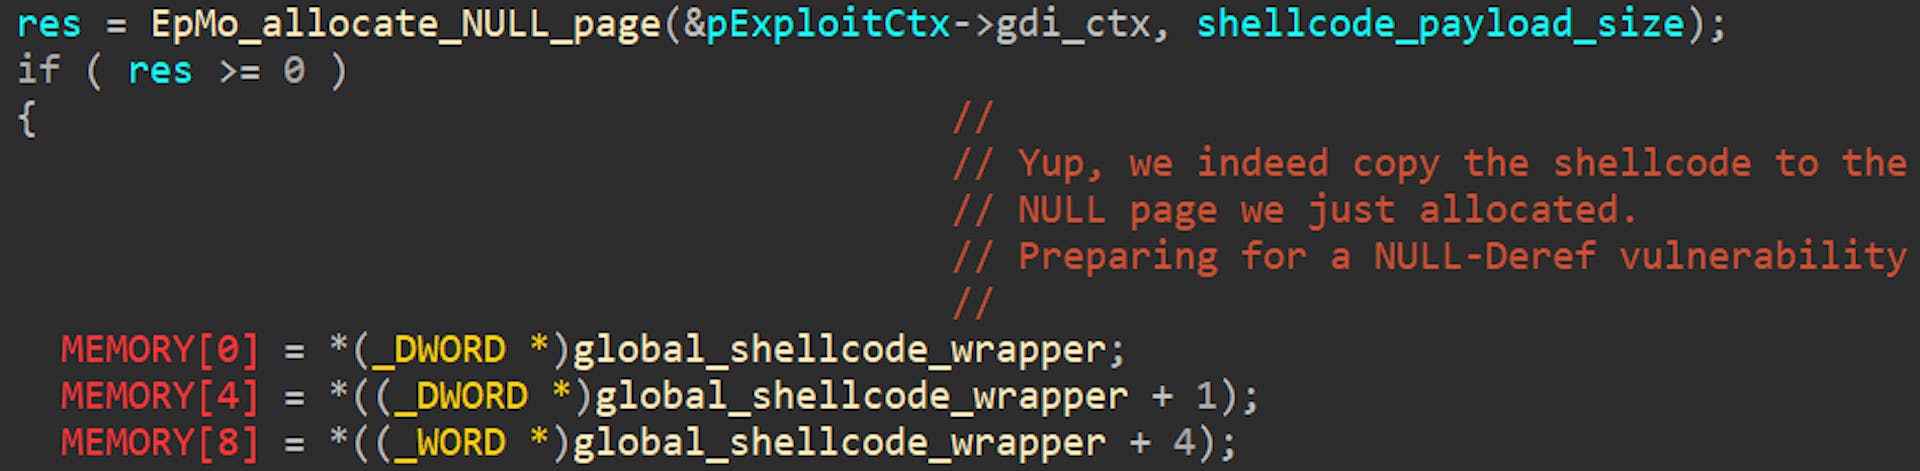 Figure 8: Preparation of the NULL-page, as part of the EpMo exploit.